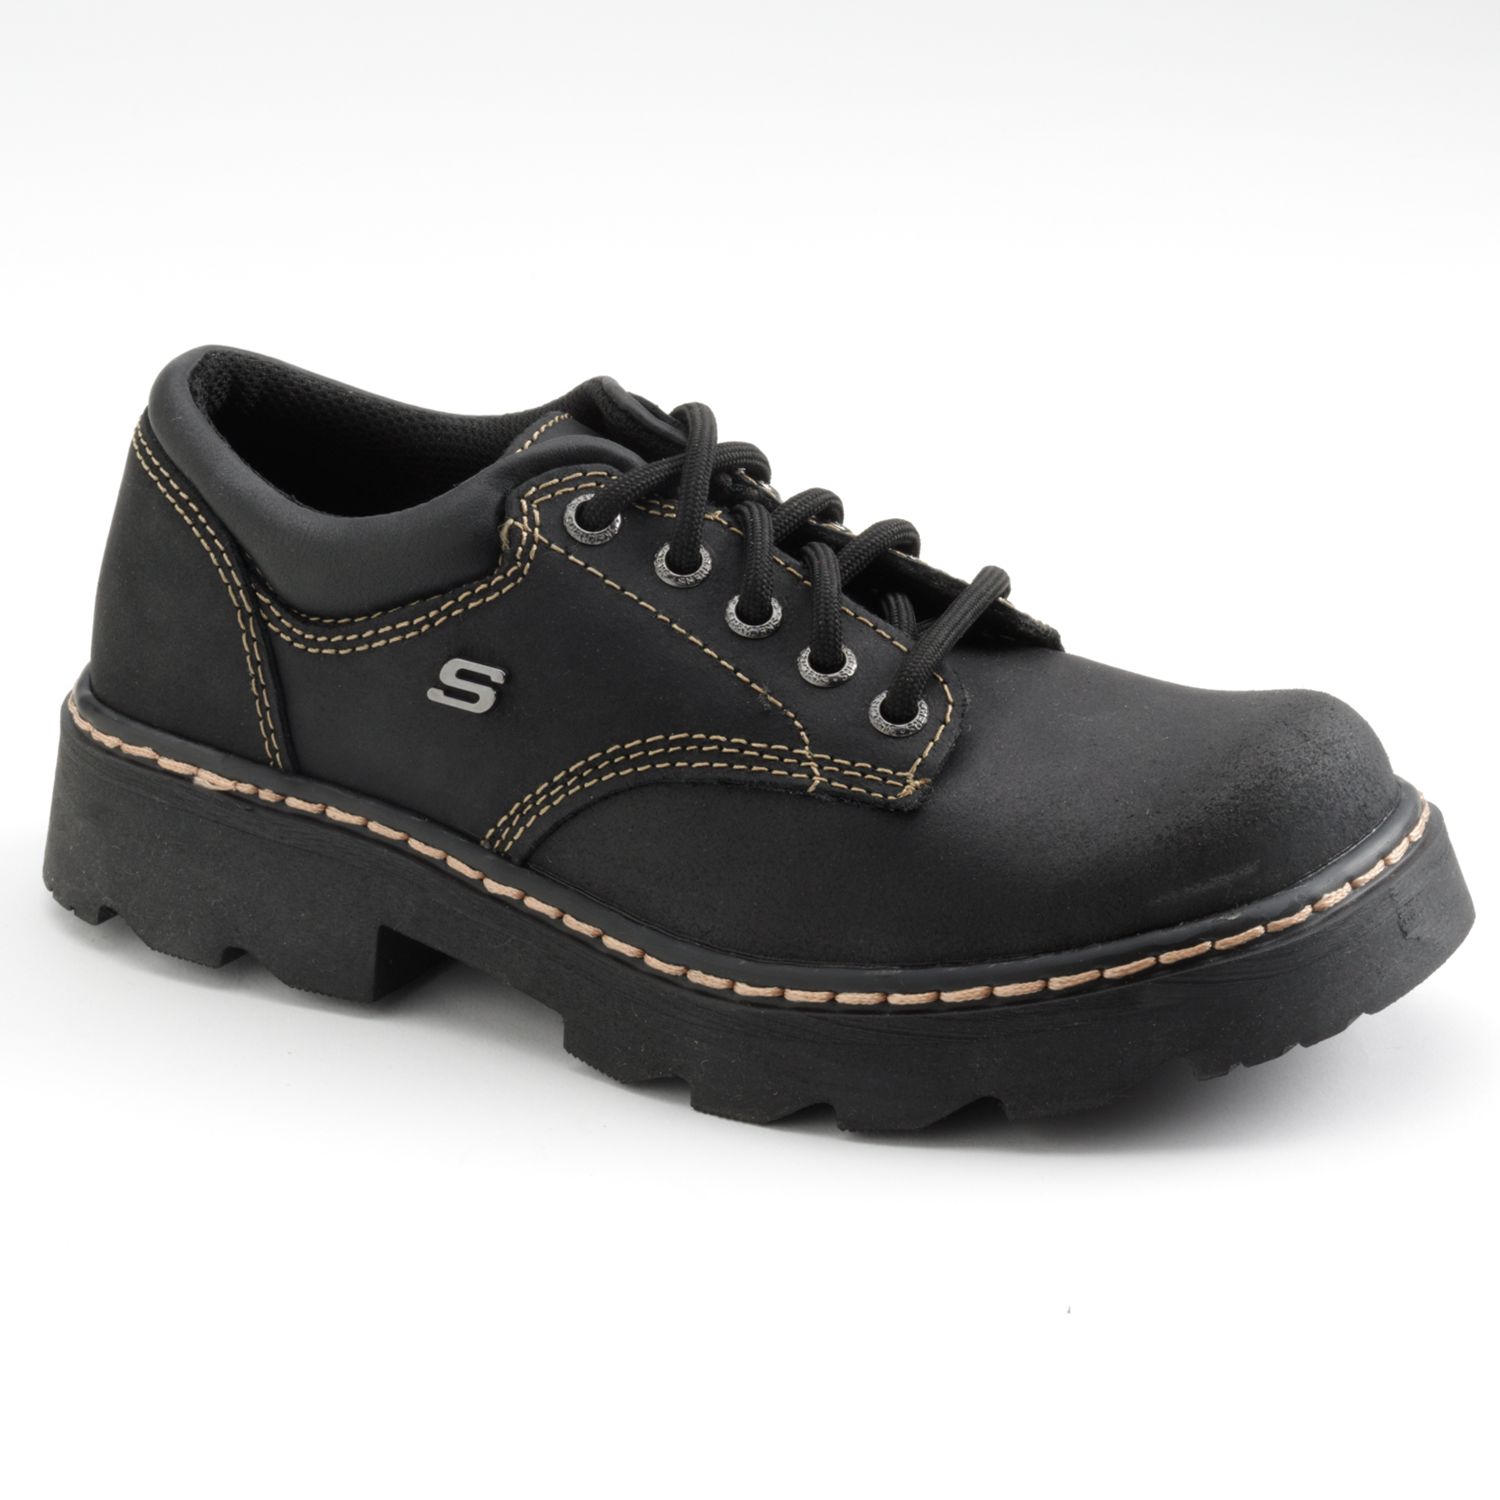 Skechers Parties Mate Oxford Shoes - Women